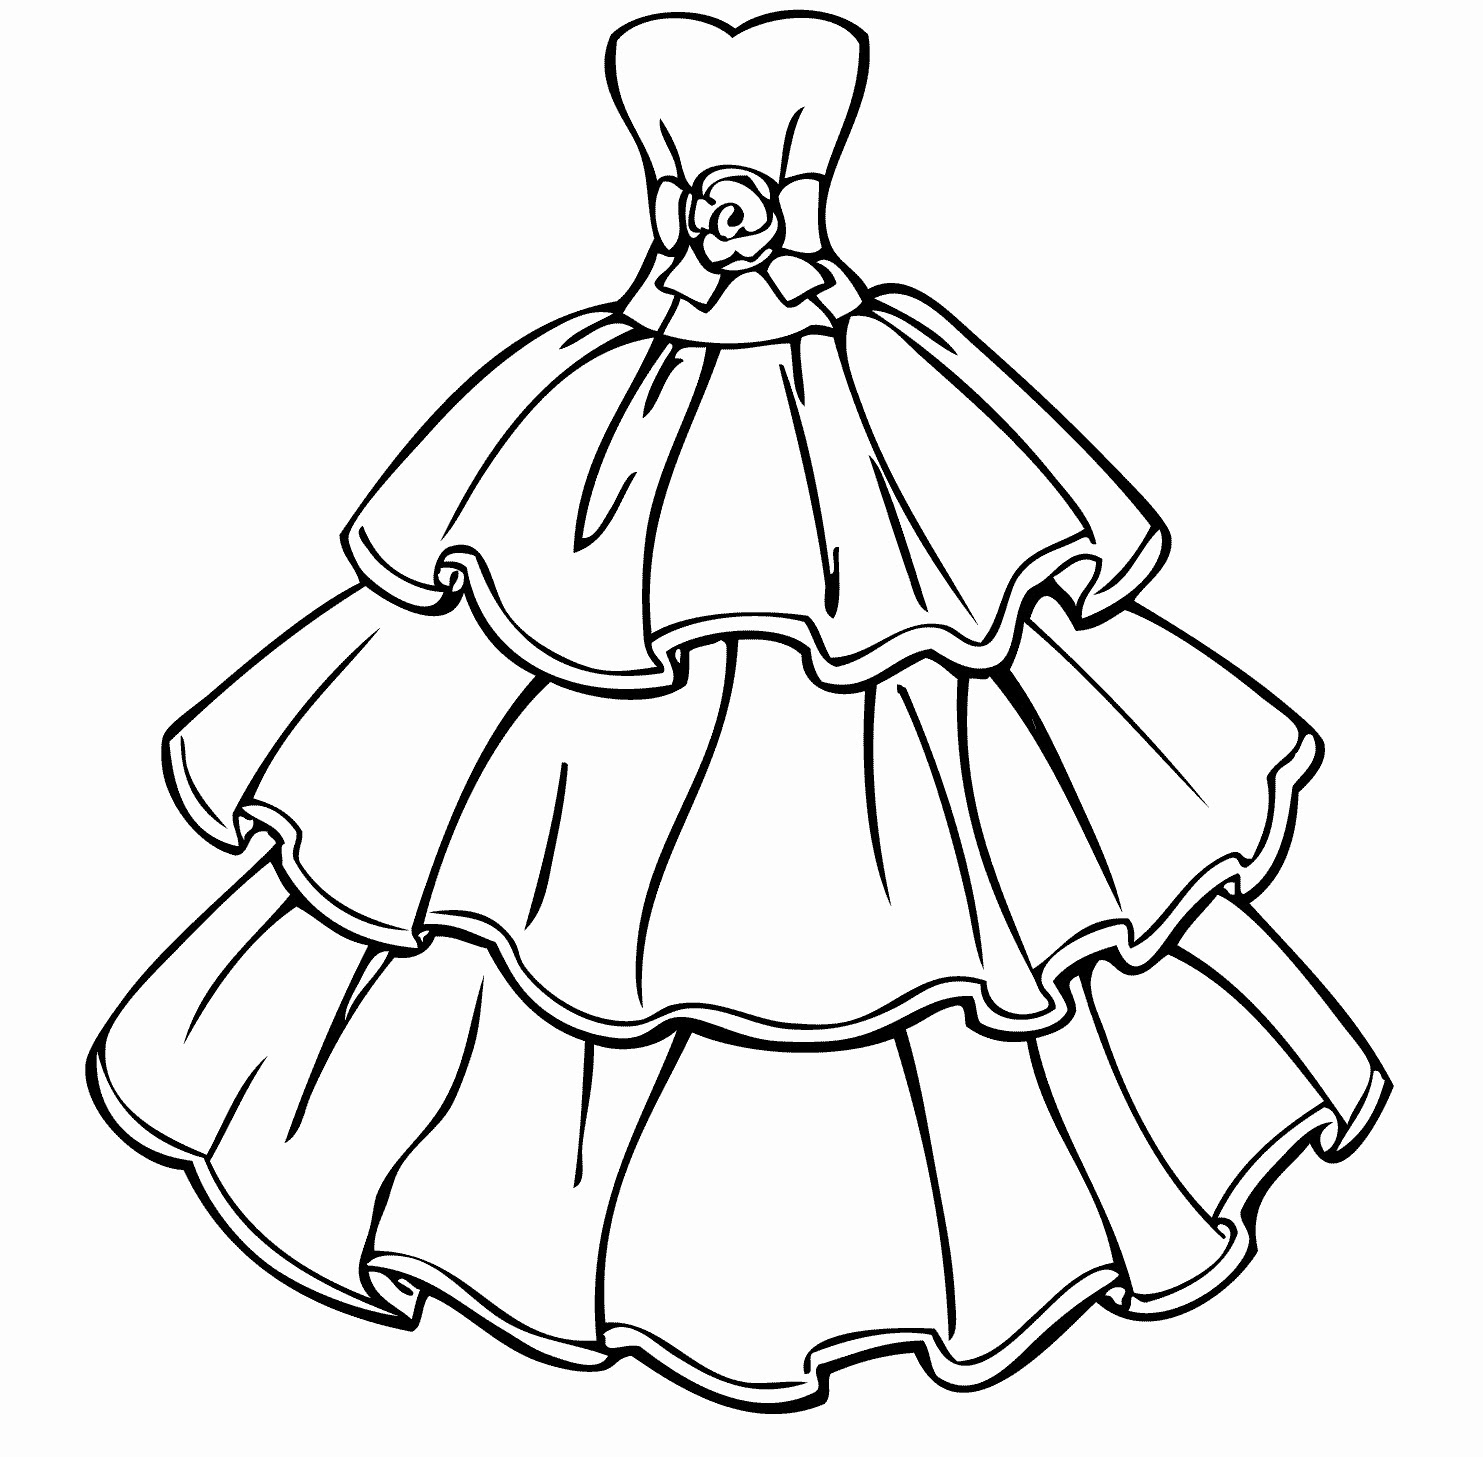 Download Barbie Wedding Dress Coloring Pages at GetDrawings | Free download